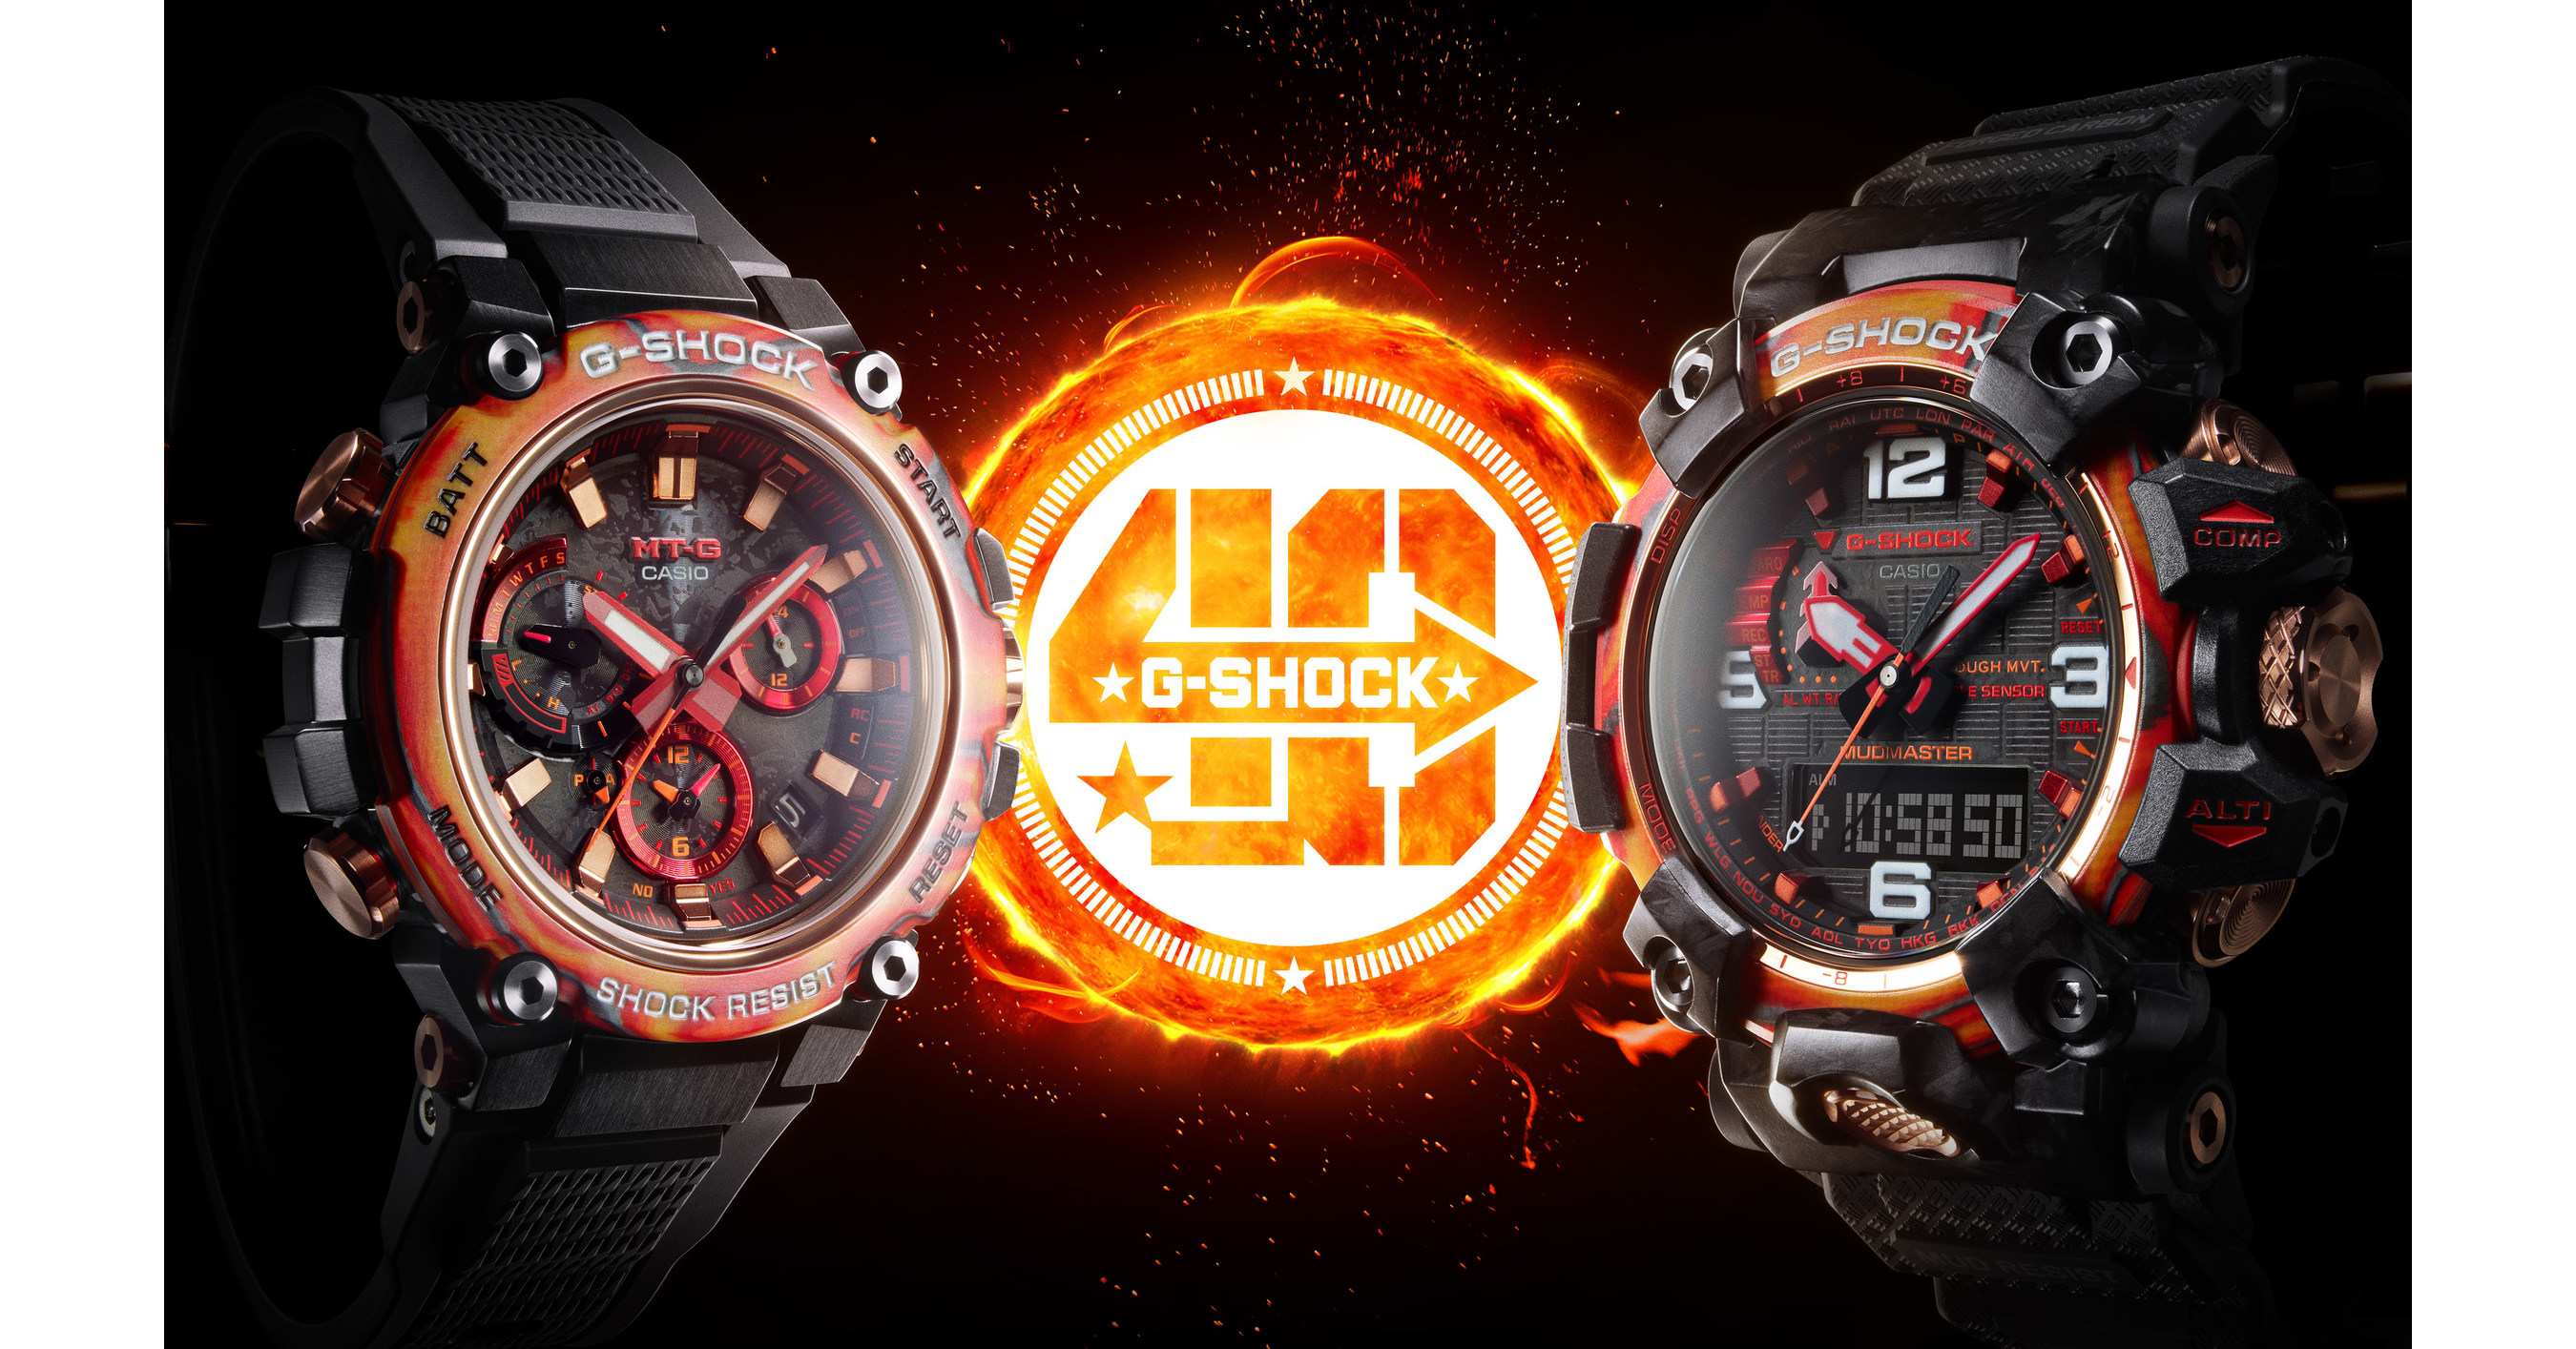 CASIO G-SHOCK CELEBRATES 40TH ANNIVERSARY THE RELEASE OF NEW FLARE